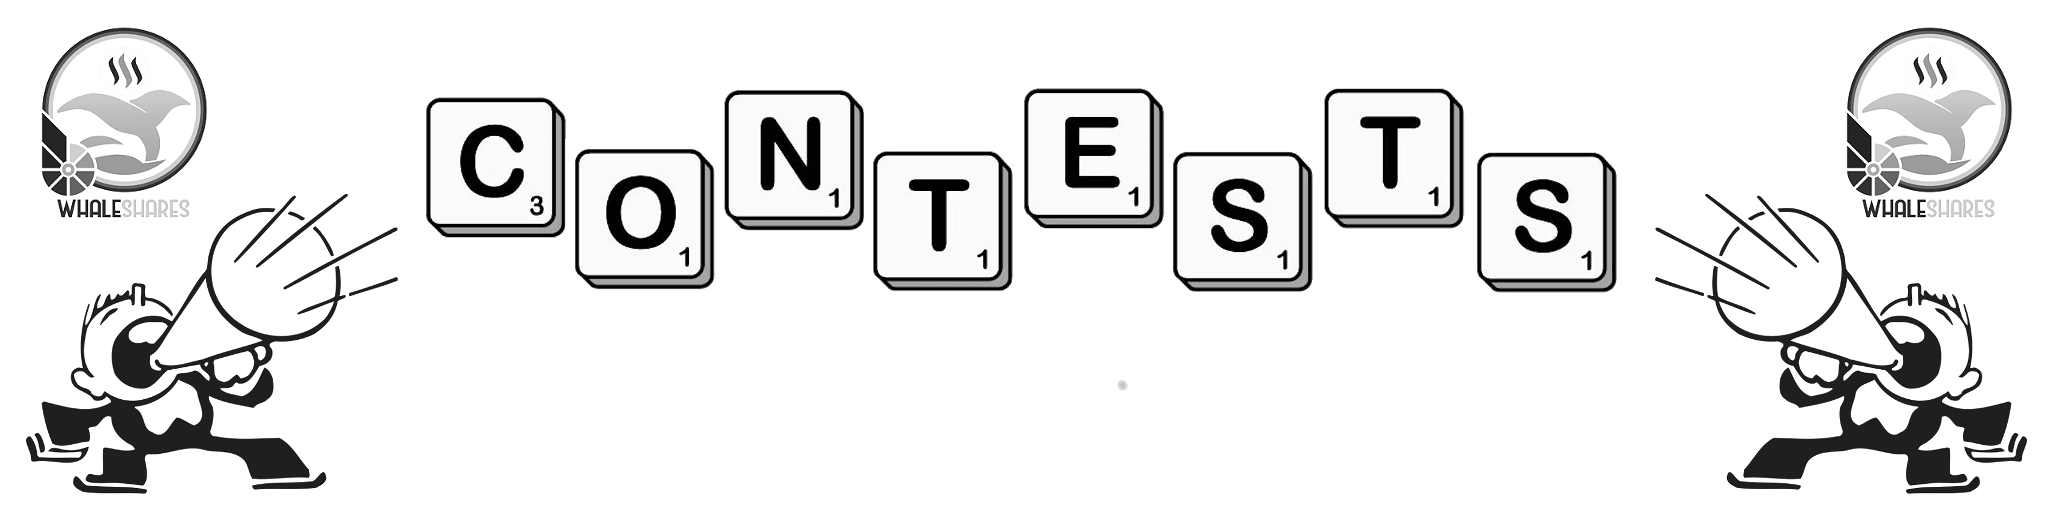 contests.png